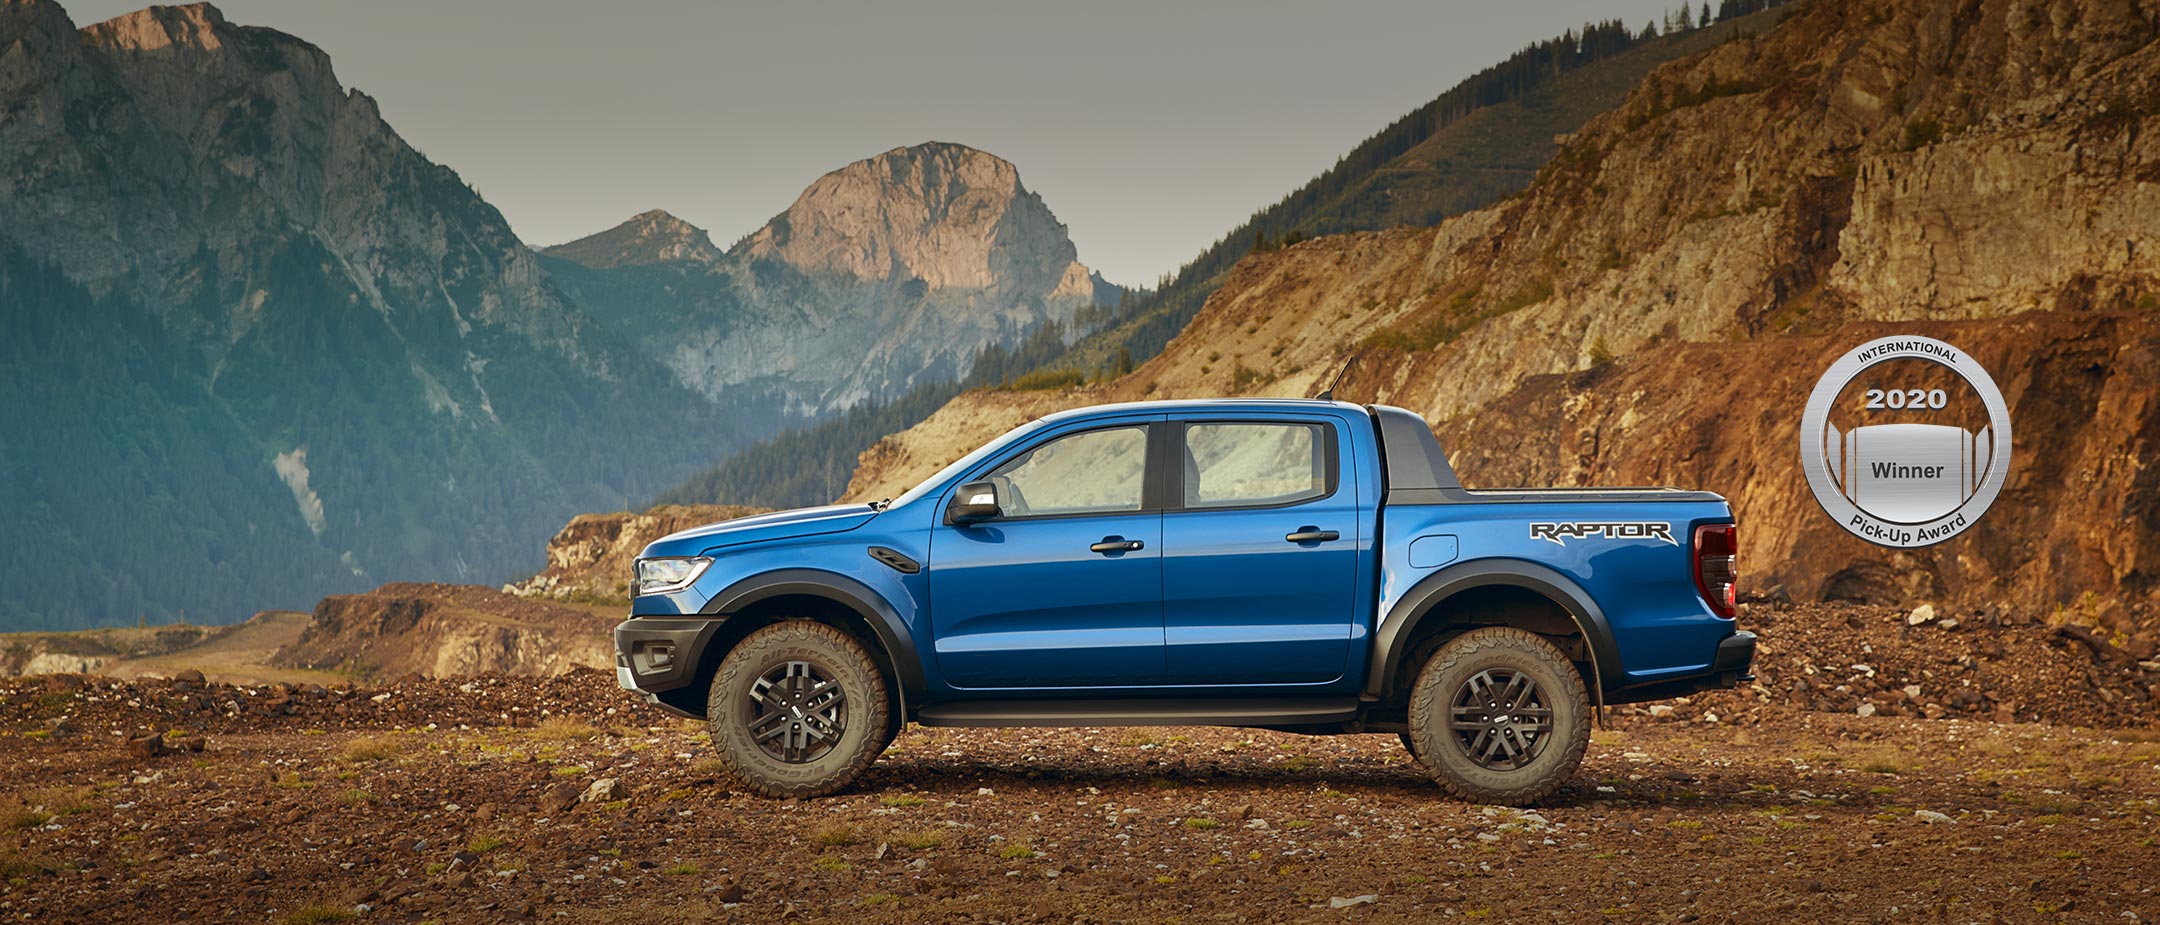 Blue Ford Ranger Raptor parked on snowy mountains